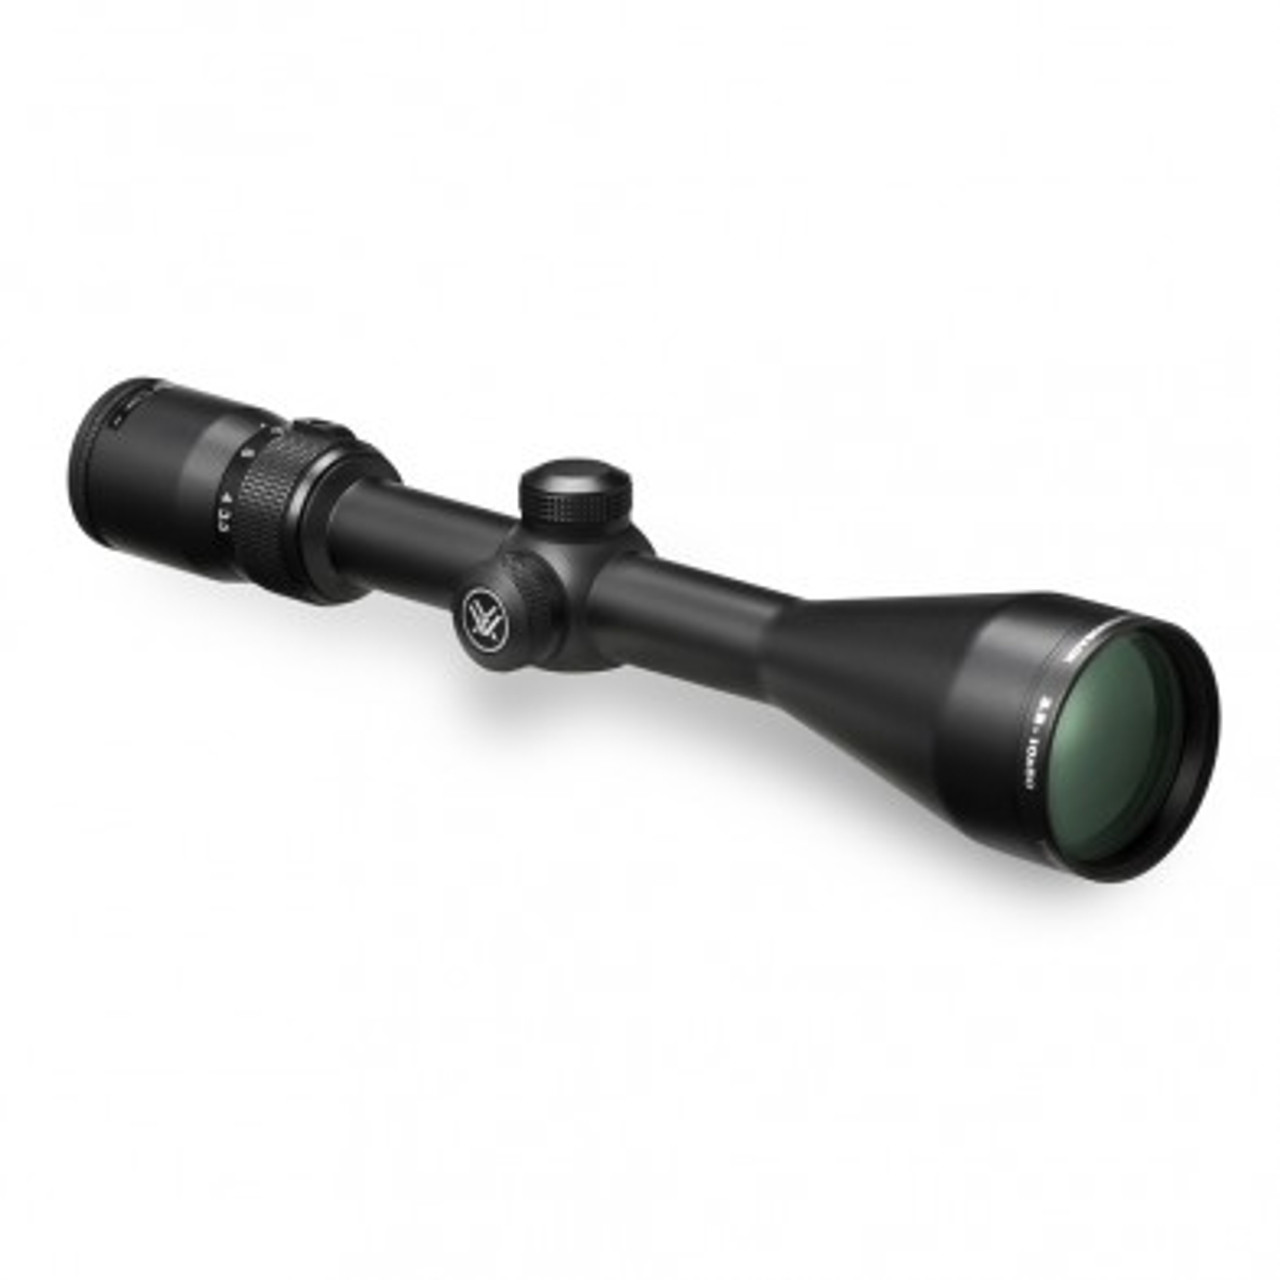 Diamondback riflescopes are loaded with features. First, the solid one-piece aircraft-grade aluminum alloy construction makes the Diamondback riflescope virtually indestructible and highly resistant to magnum recoil. Argon purging puts waterproof and fogproof performance on the agenda, and advanced fully multi-coated optics raise an eyebrow when crystal clear, tack-sharp images appear in the crosshairs. Look for all this and more in a riflescope you'd expect to cost quite a bit more, but doesn't.